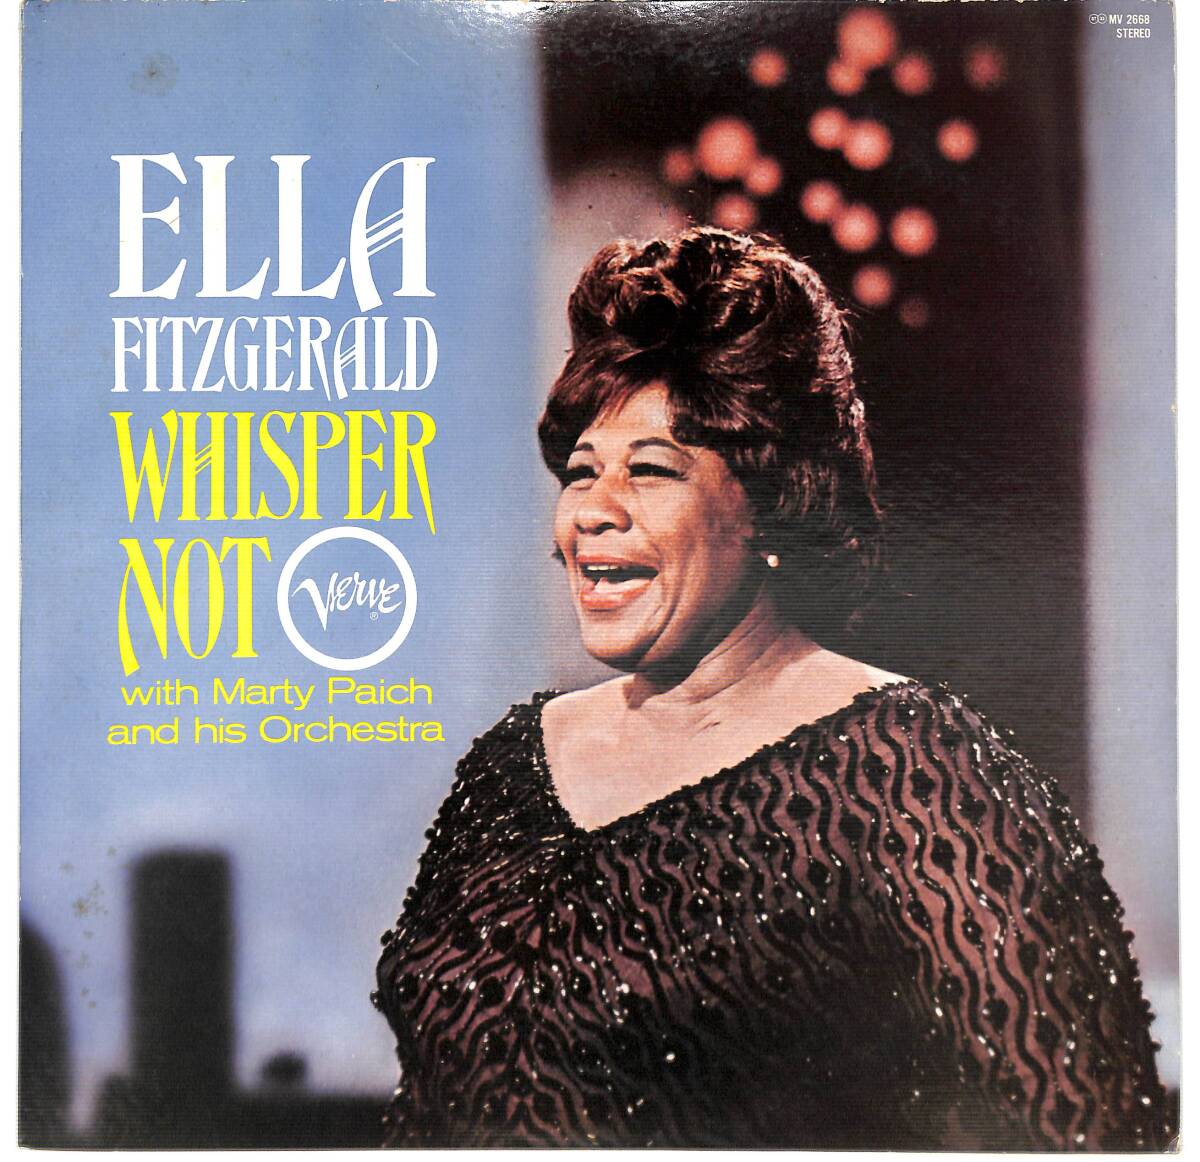 e3395/LP/Ella Fitzgerald With Marty Paich And His Orchestra/Whisper Notの画像1